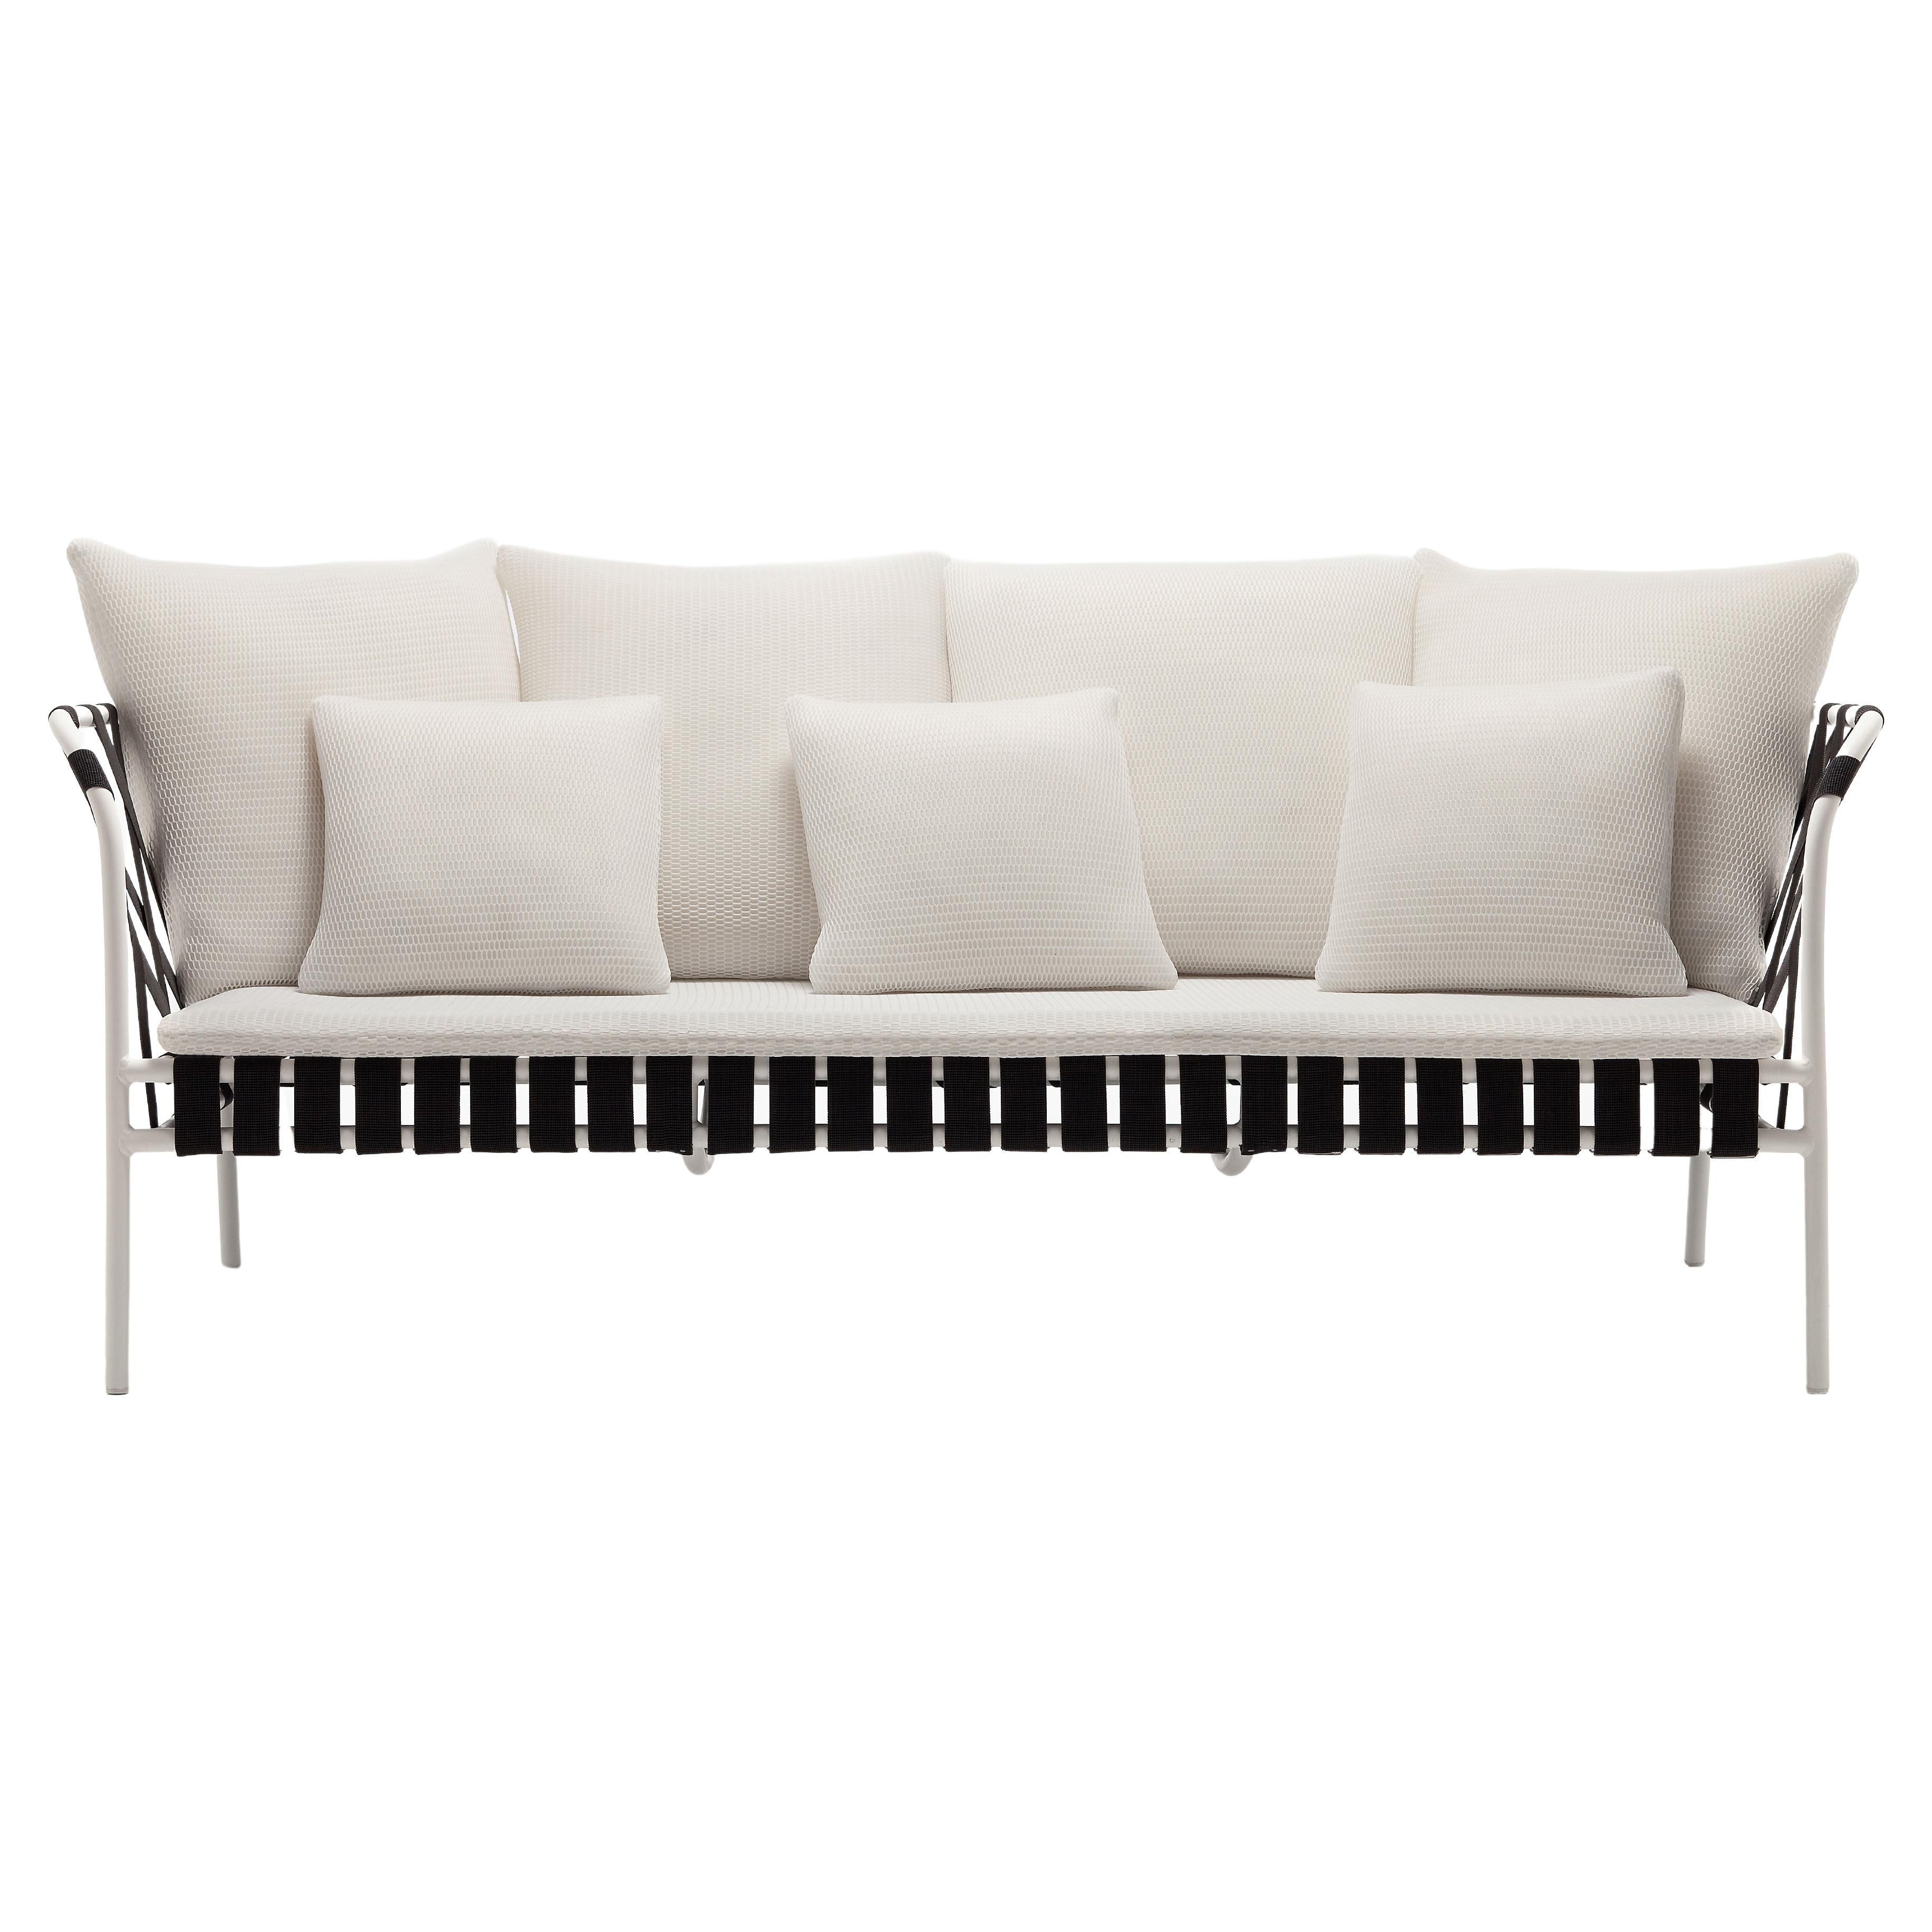 Gervasoni Large Inout Sofa in Aspen 02 Upholstery & White Frame with Black Belts For Sale